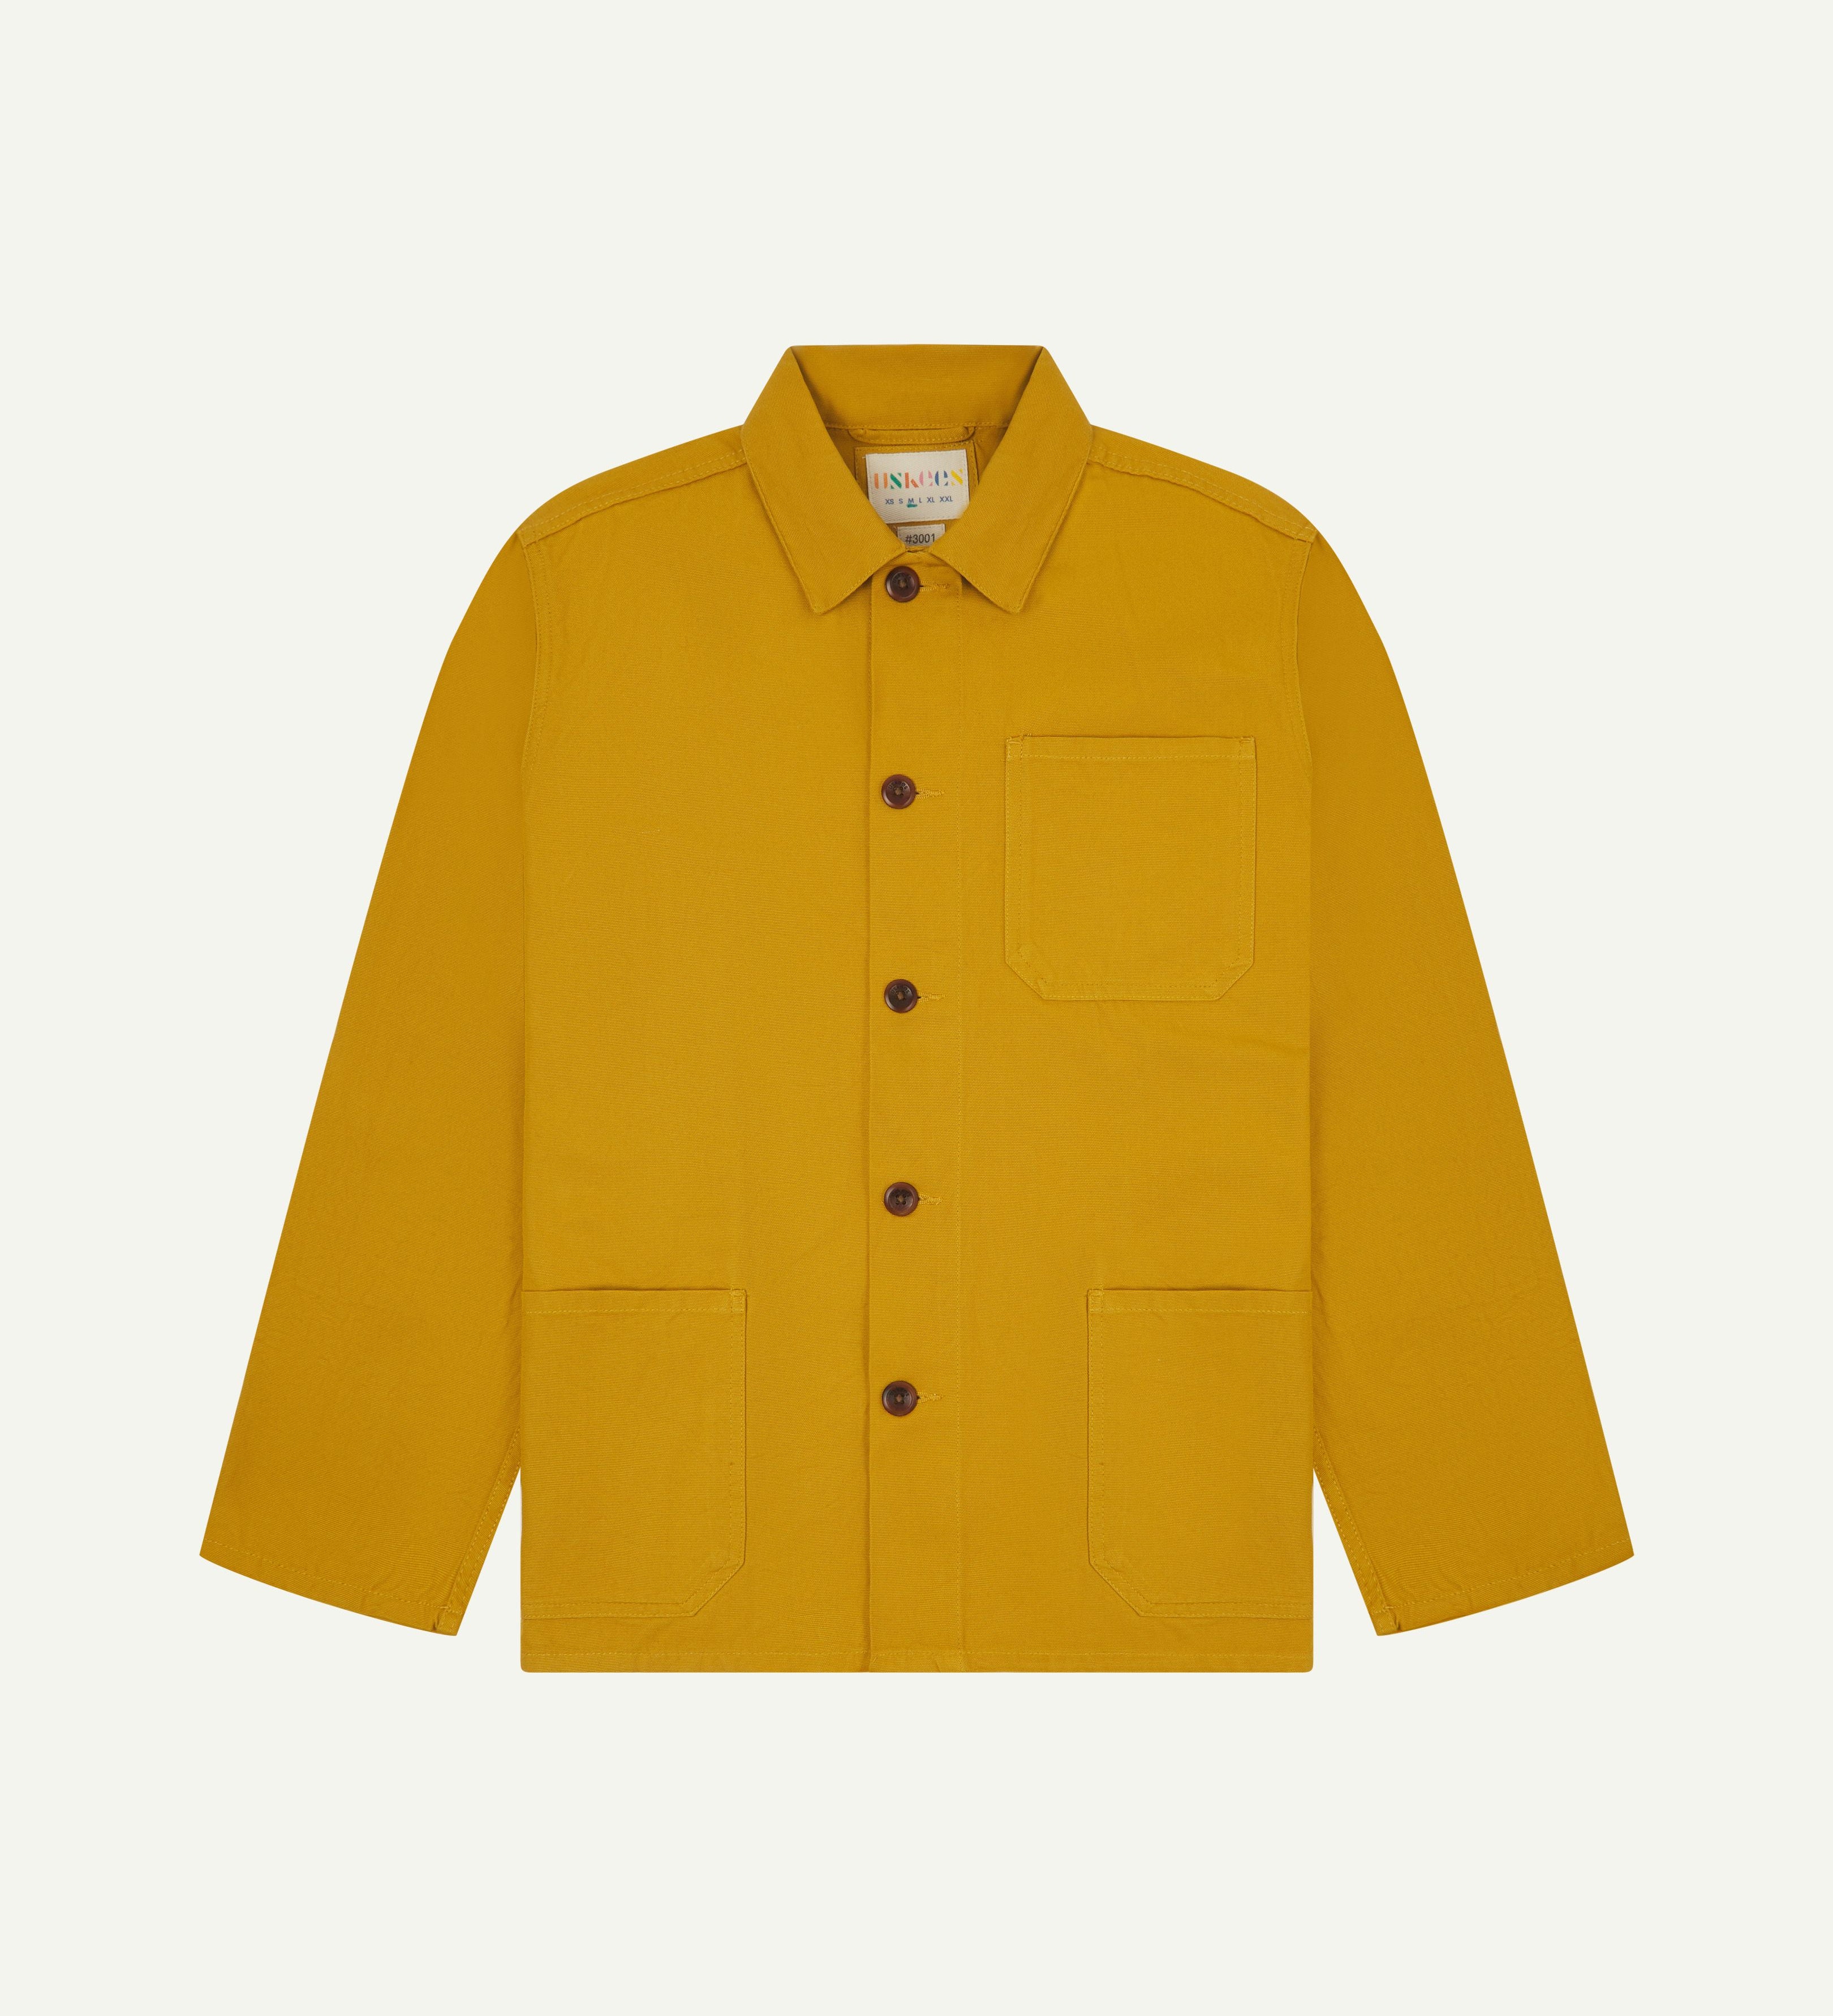 front flat shot of bright yellow, buttoned overshirt for men from Uskees